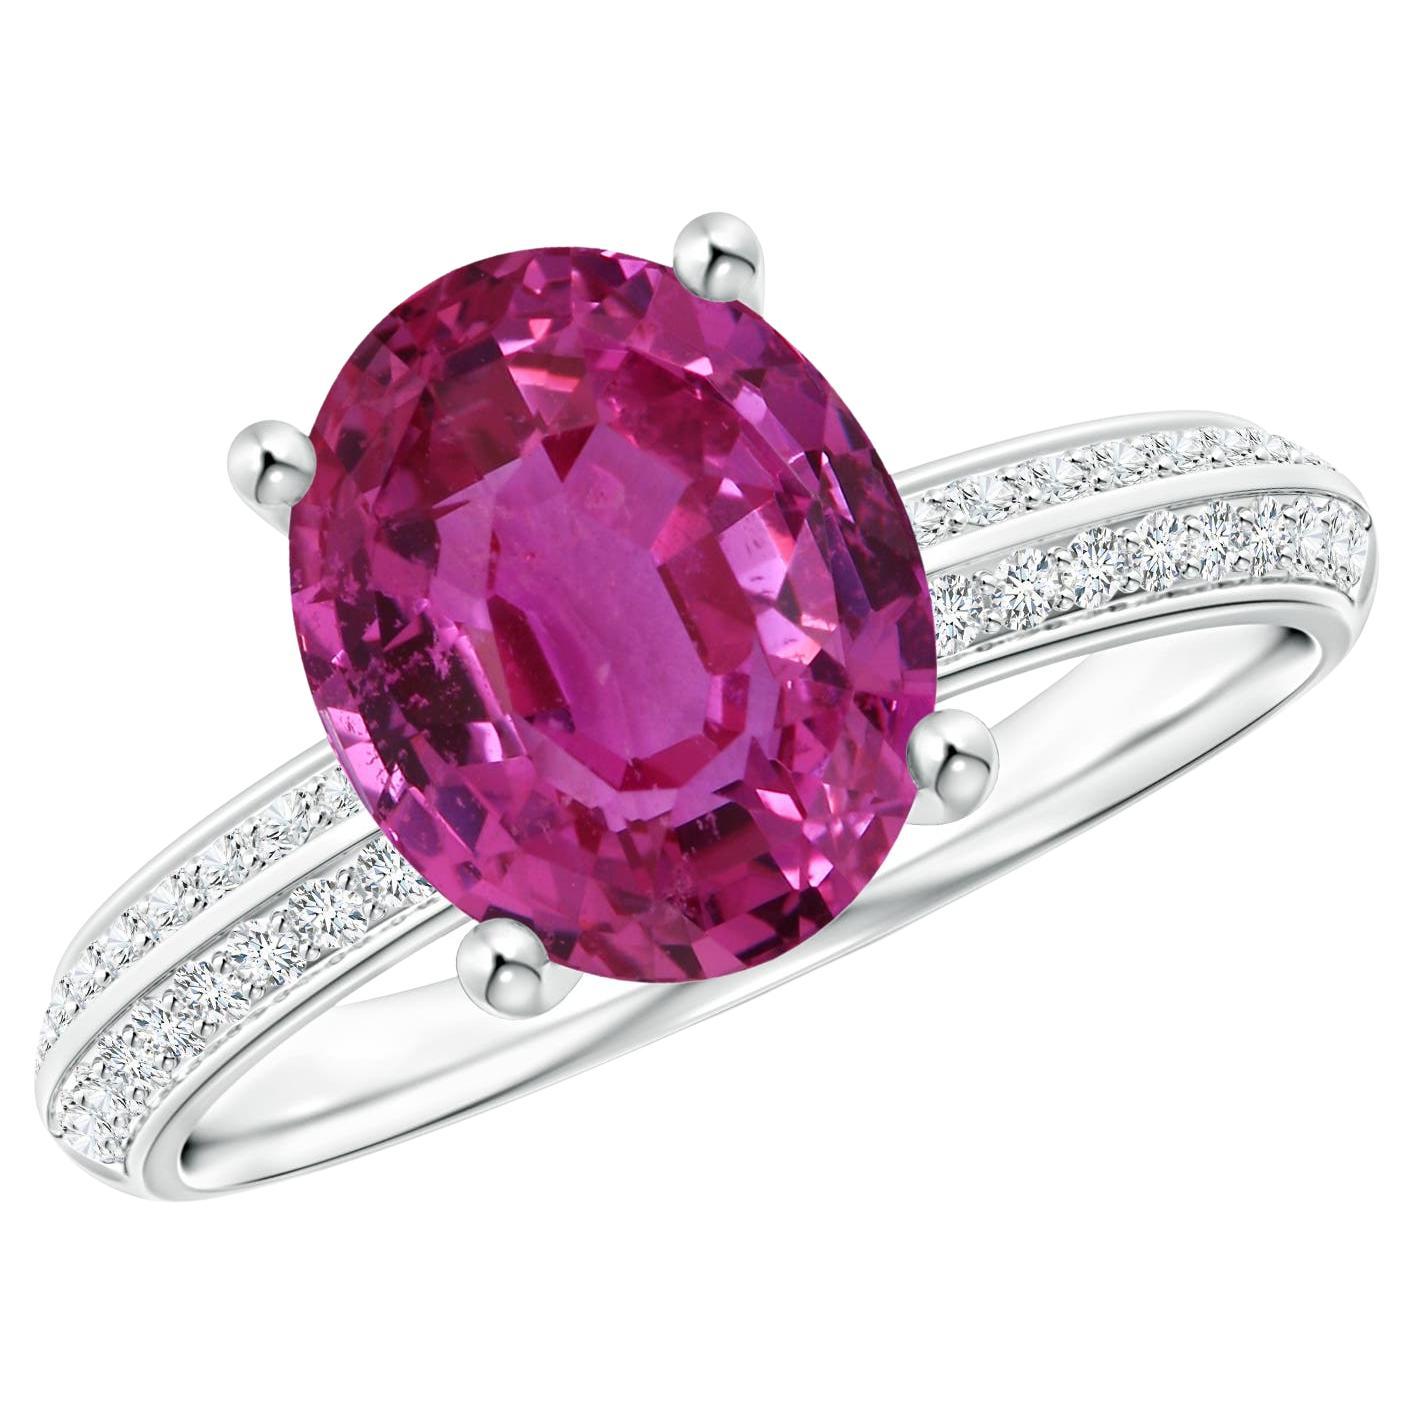 For Sale:  Angara Gia Certified Natural Classic Pink Sapphire Knife Edge Ring in White Gold